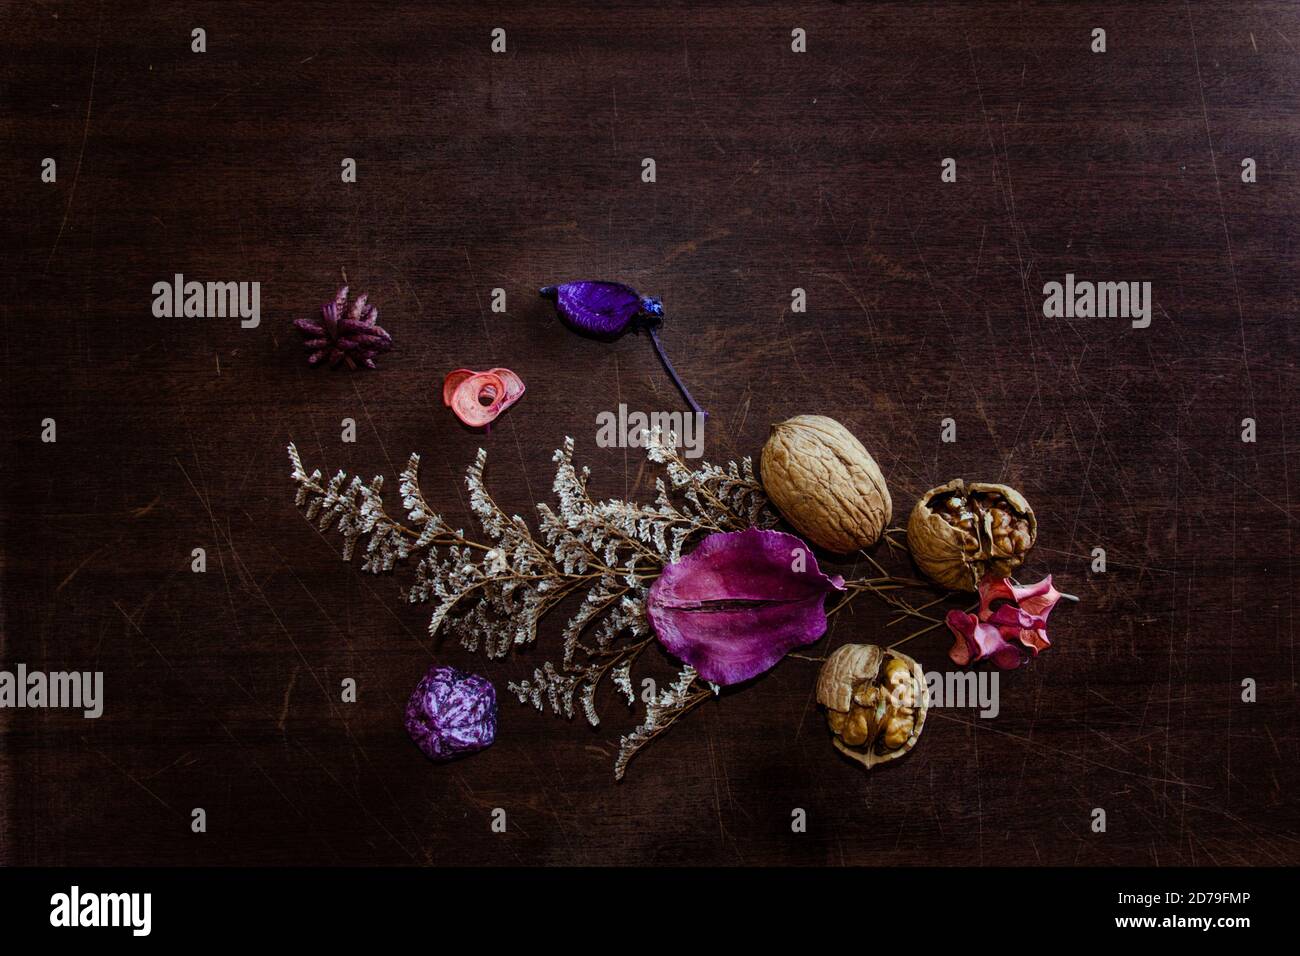 fall beautiful and vibrant colors with foliage purple dried leaves and cracked walnuts on a dark background flat lay Stock Photo